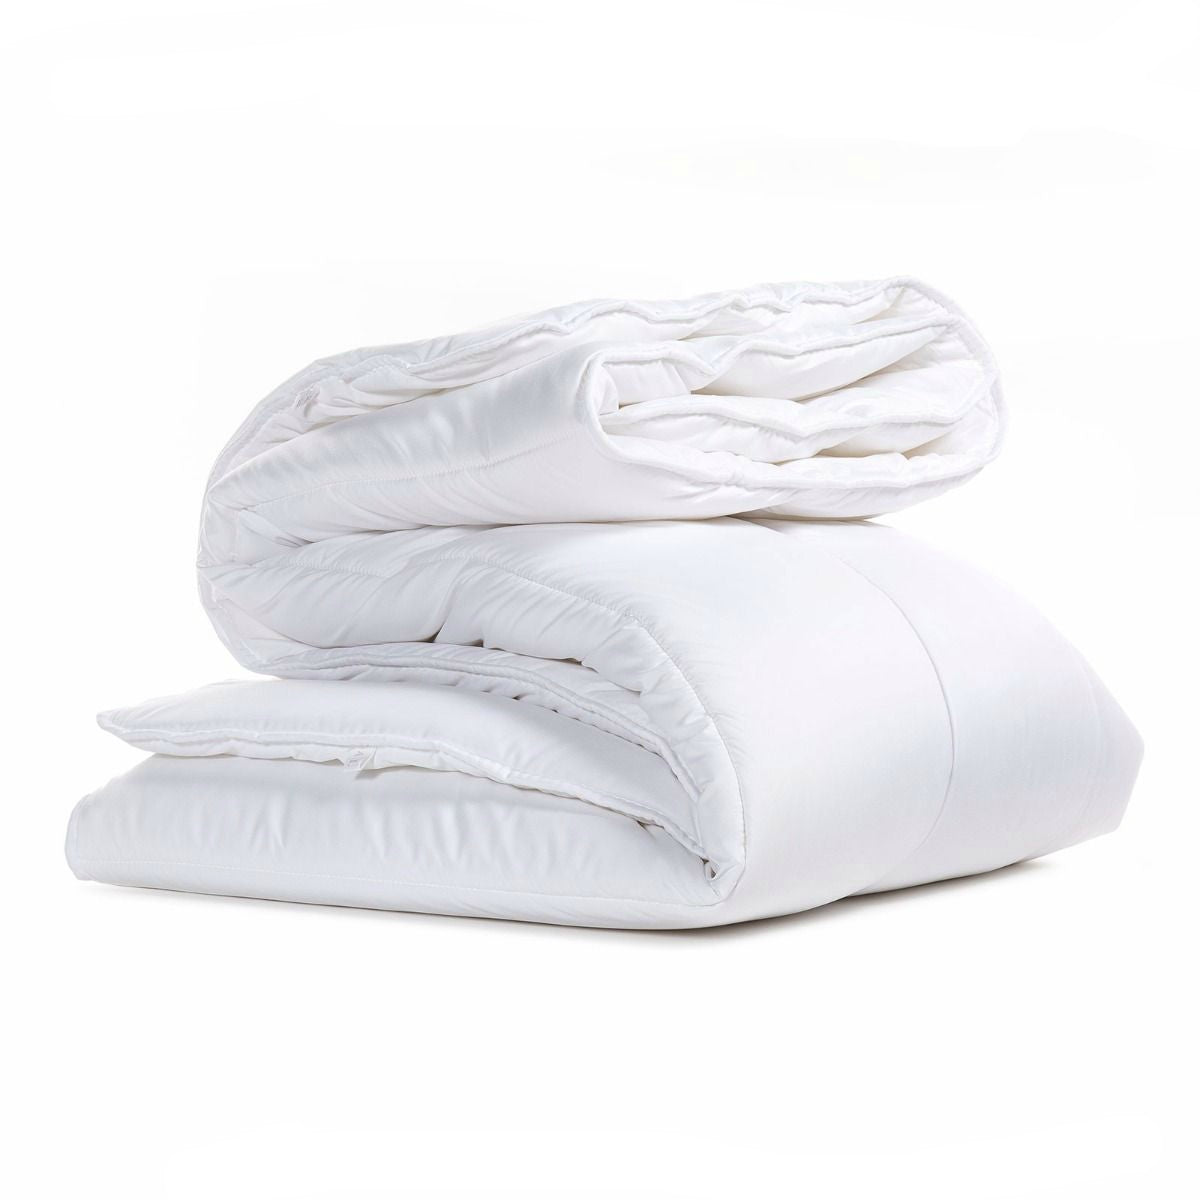 Caleffi Ghiro Double Duvet 30% Down and 70% Feathers 255x200 cm